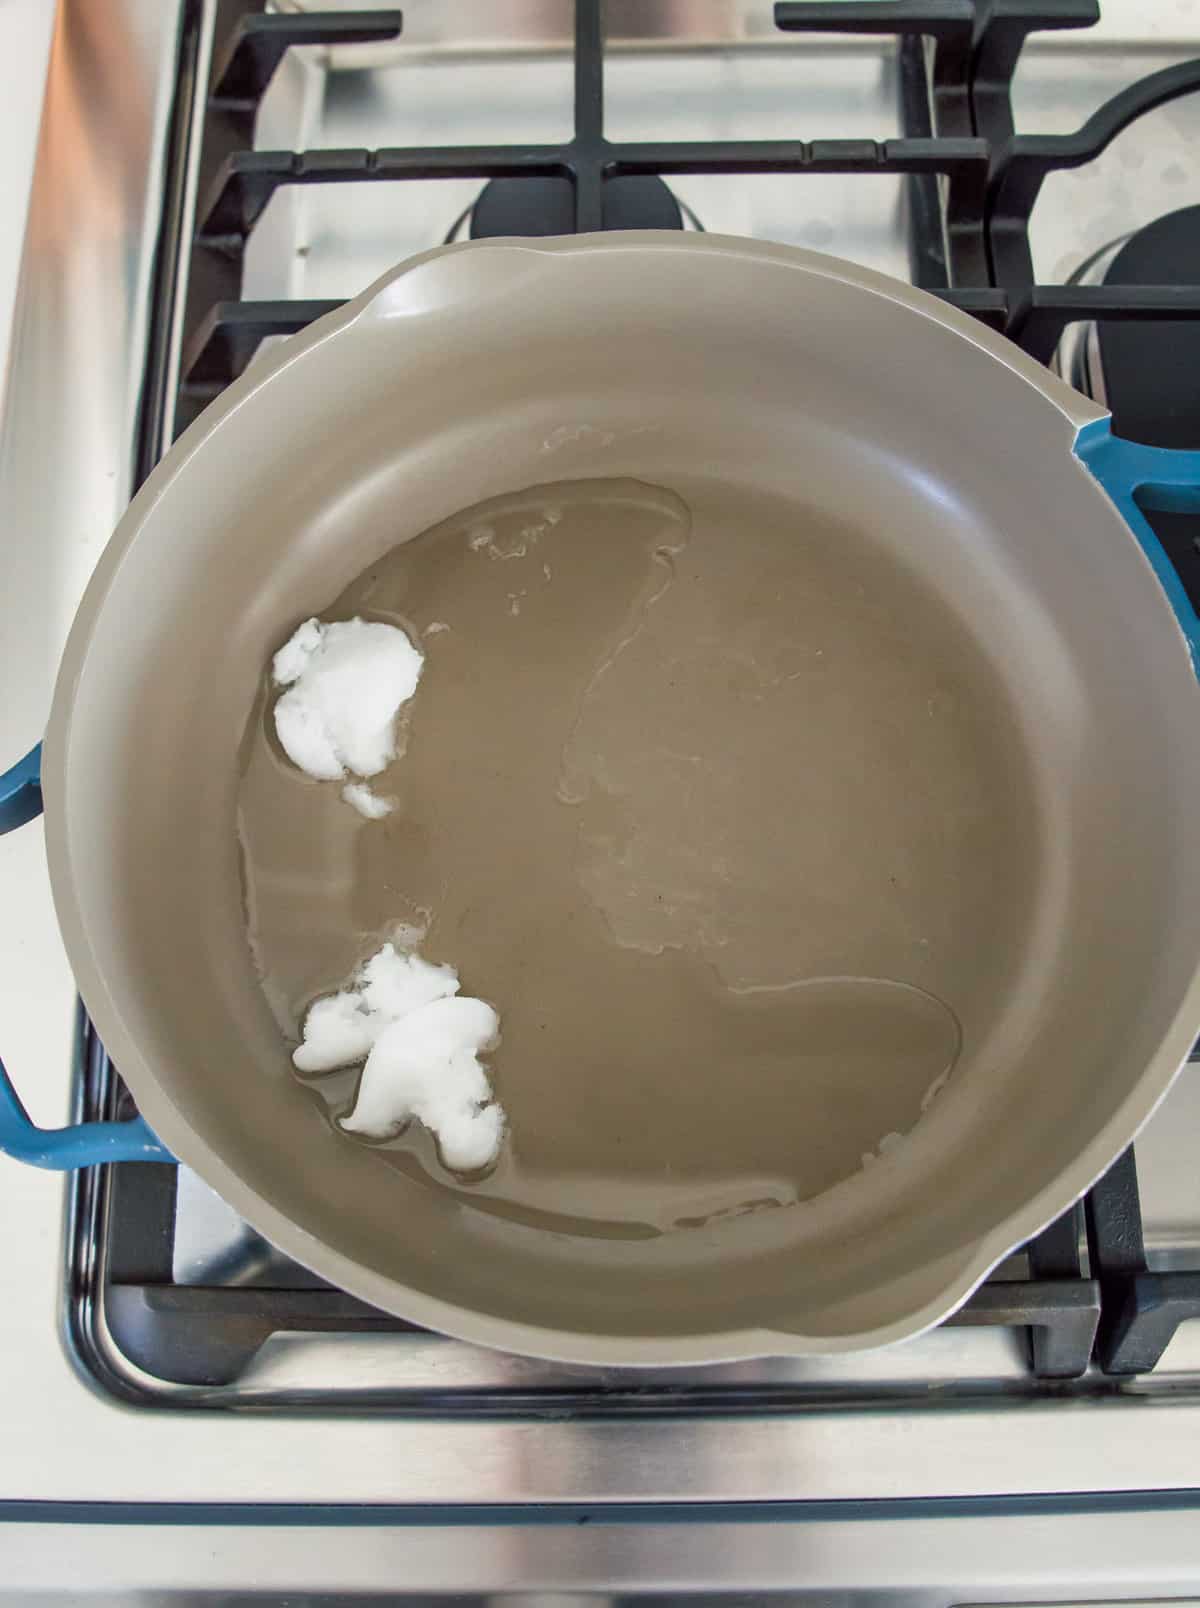 A blue frying pan on the stovetop with coconut oil in it.